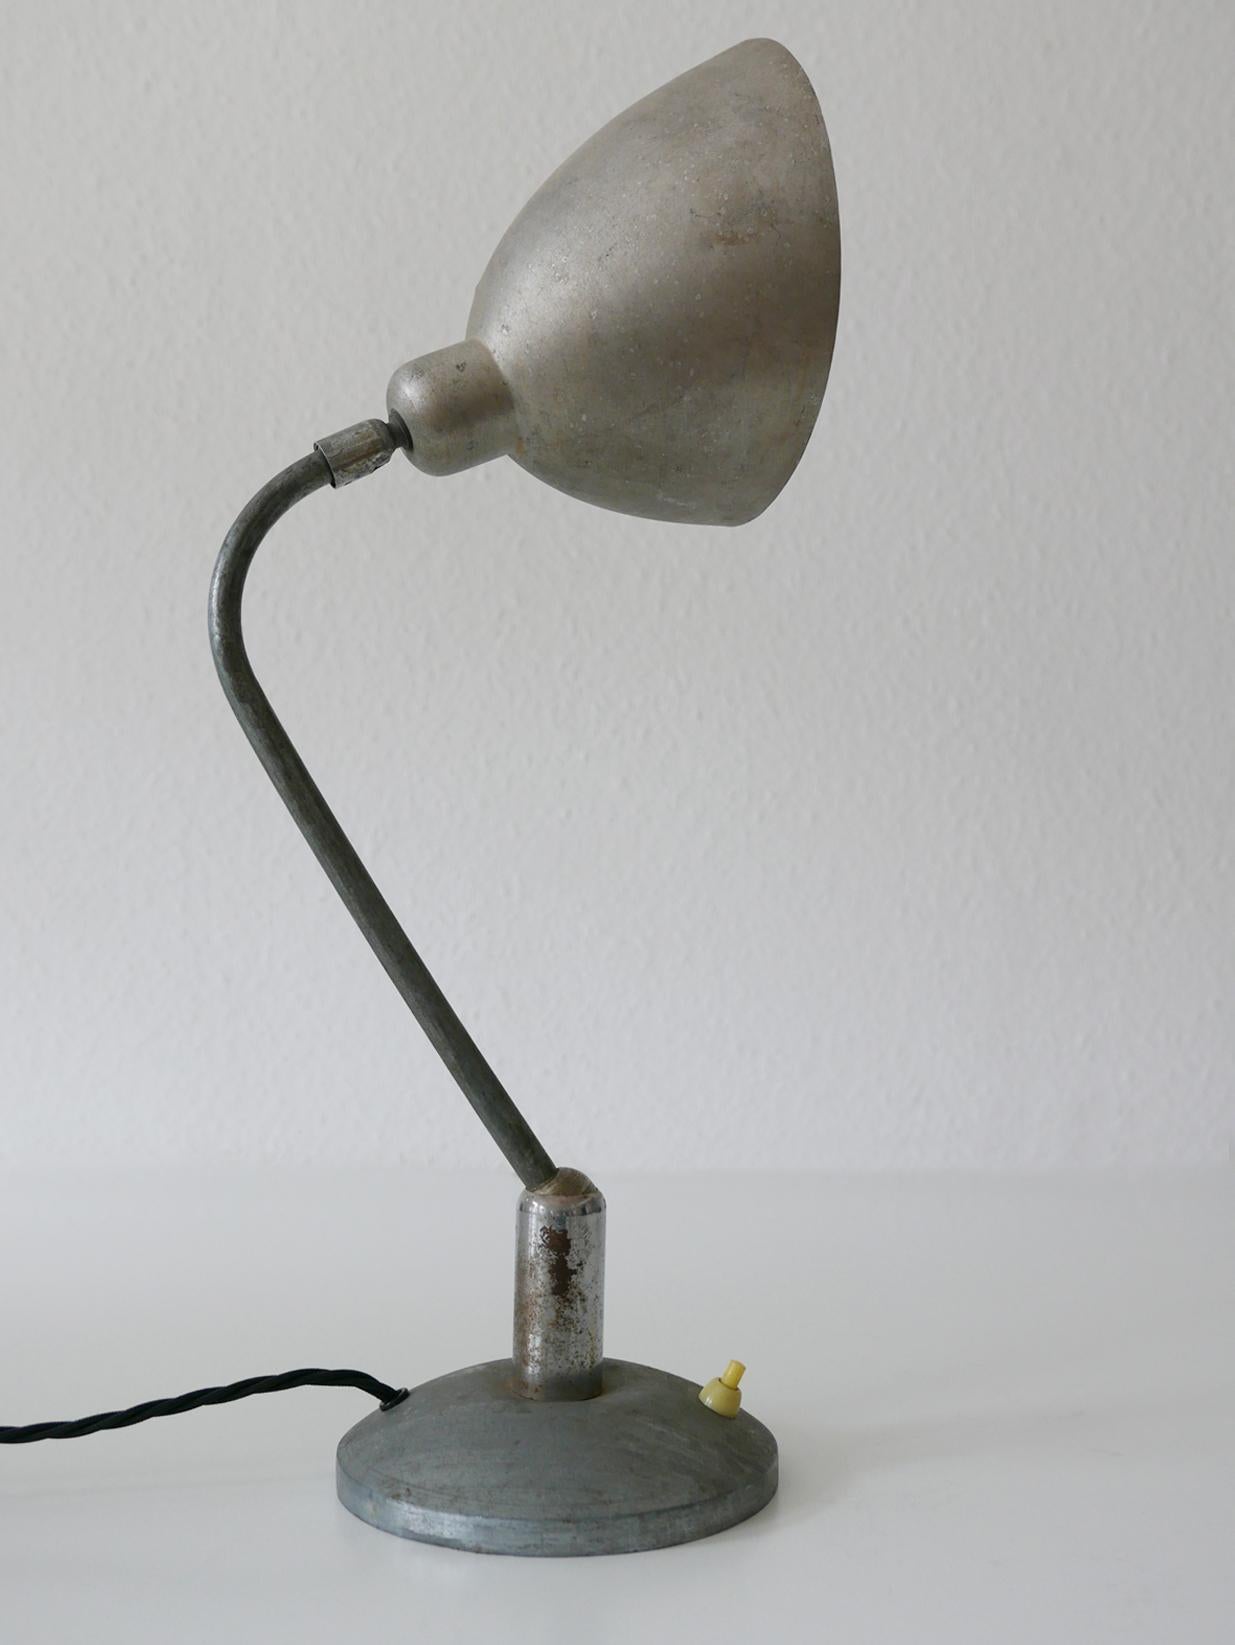 Rare Czech Functionalist or Bauhaus Table Lamp by Franta ‘Frantisek’ Anyz, 1920s For Sale 10